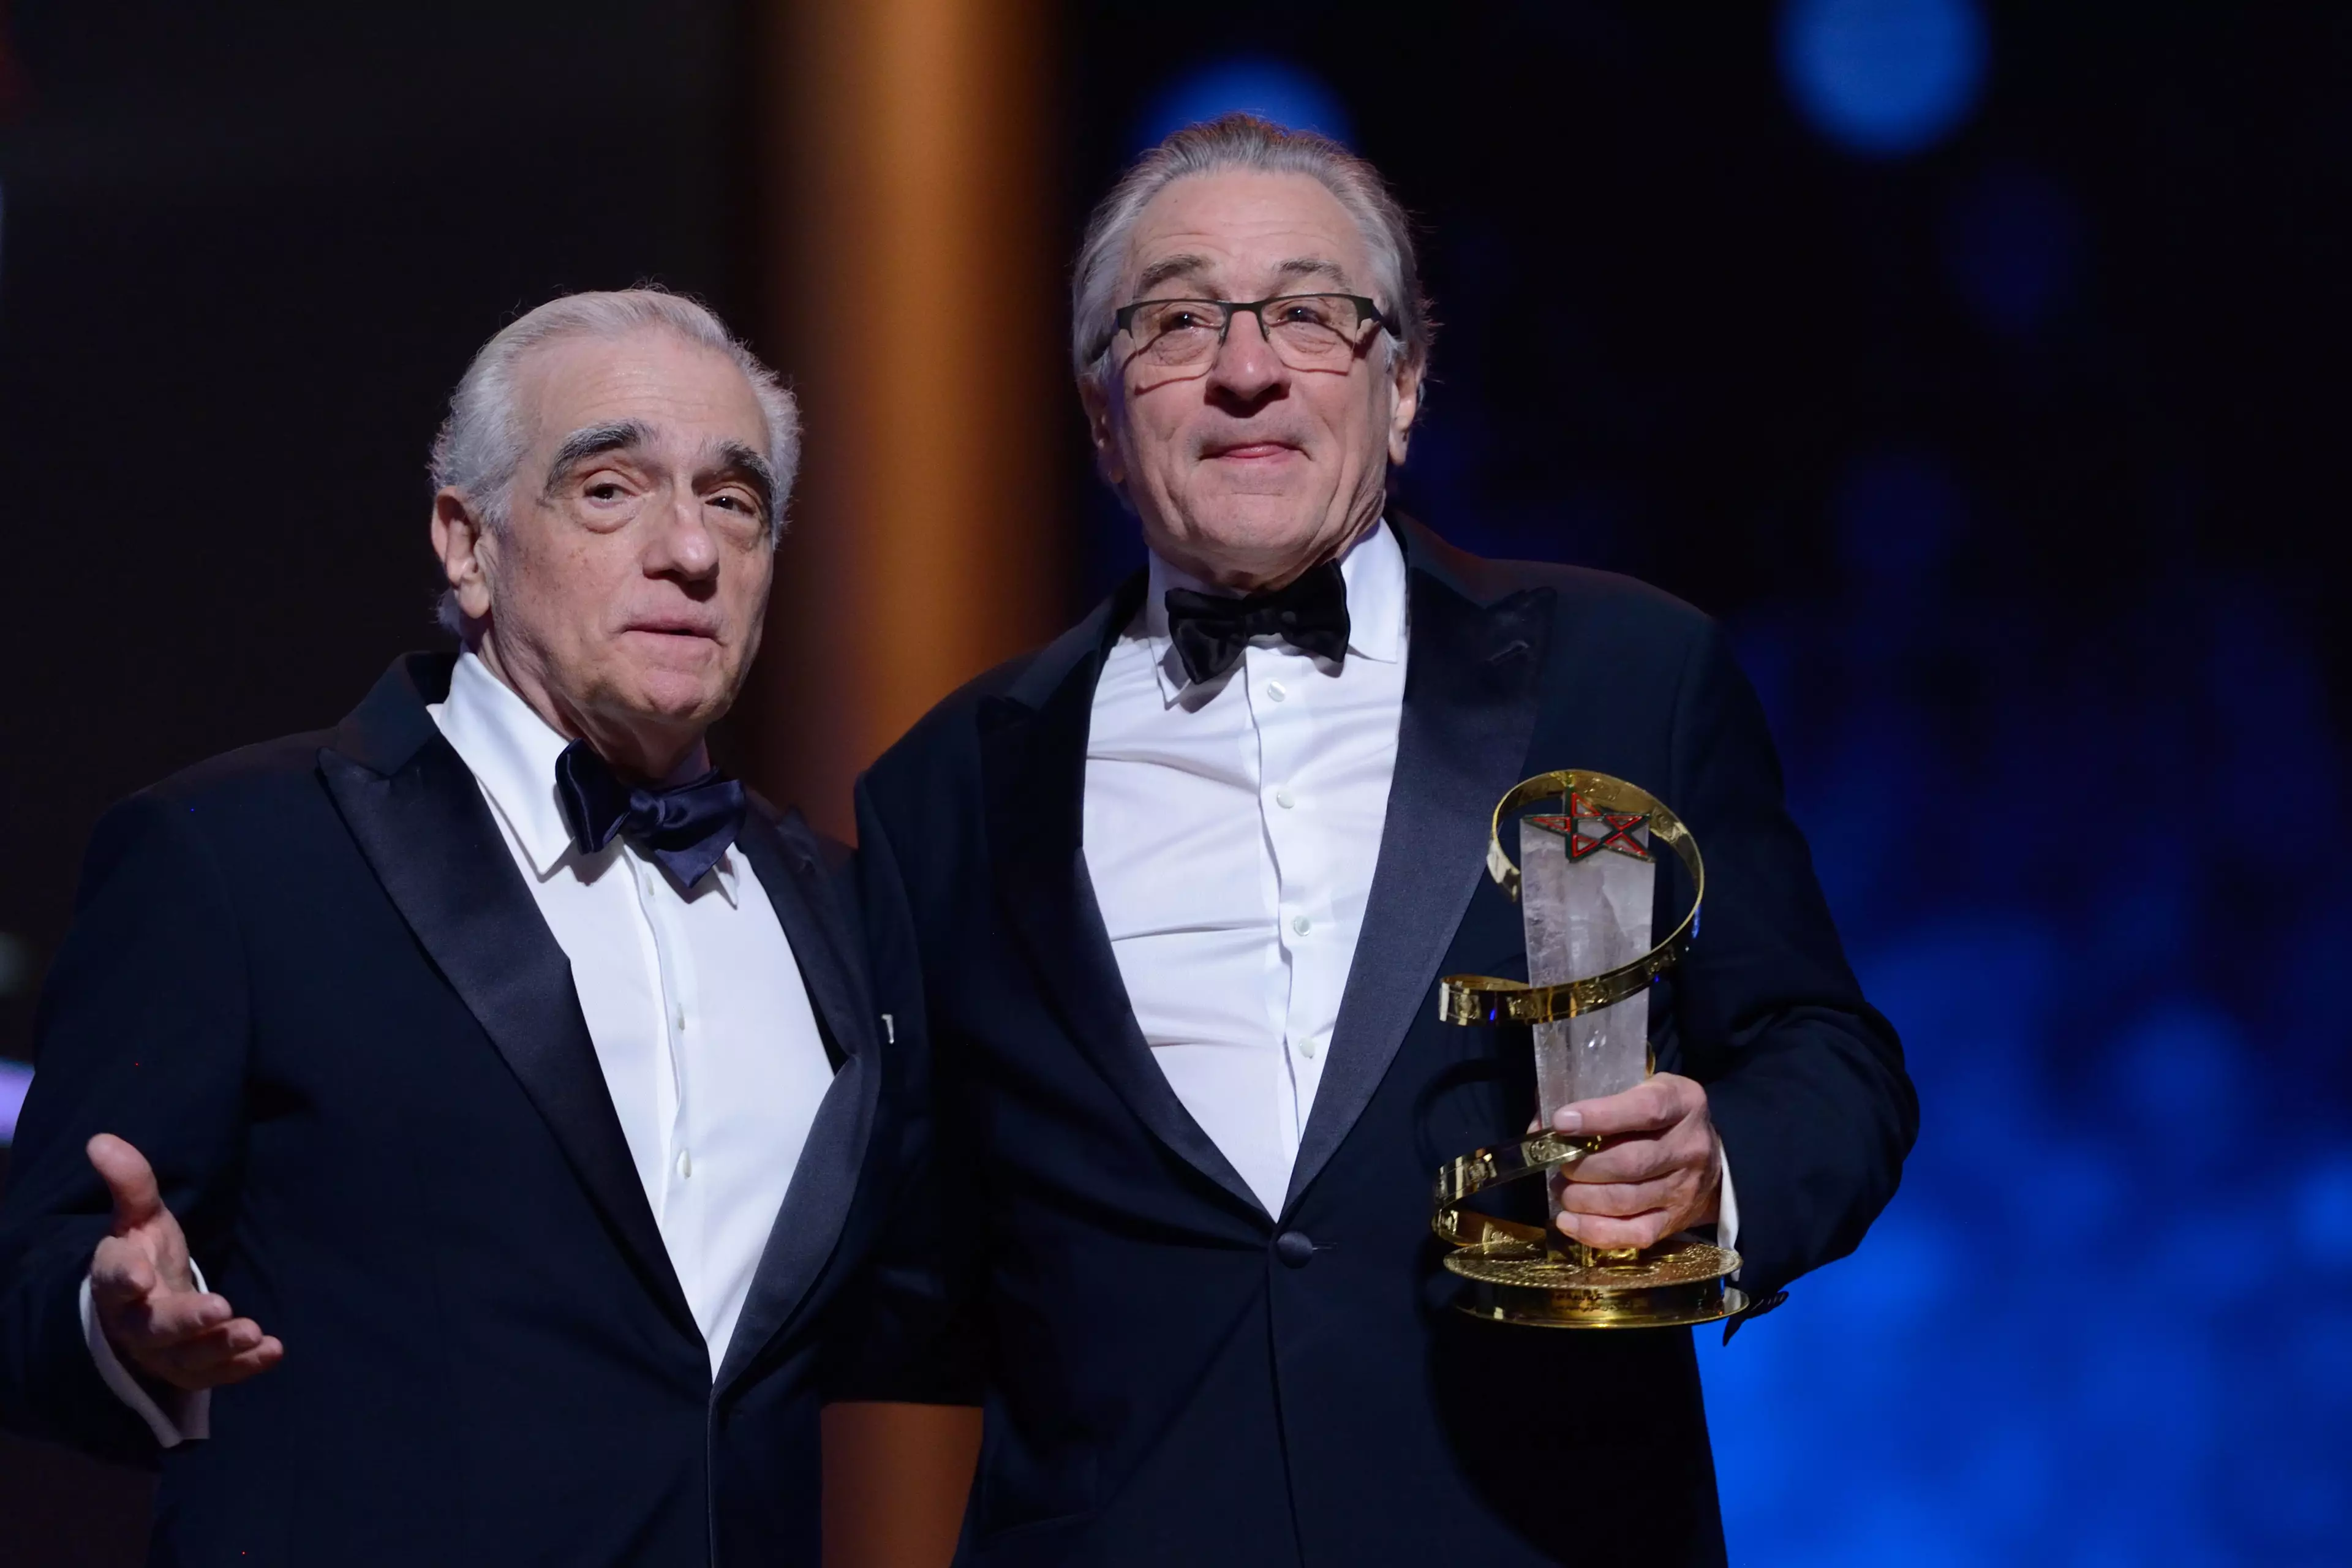 Martin Scorsese and Robert De Niro worked together on the new gangster film The Irishman.